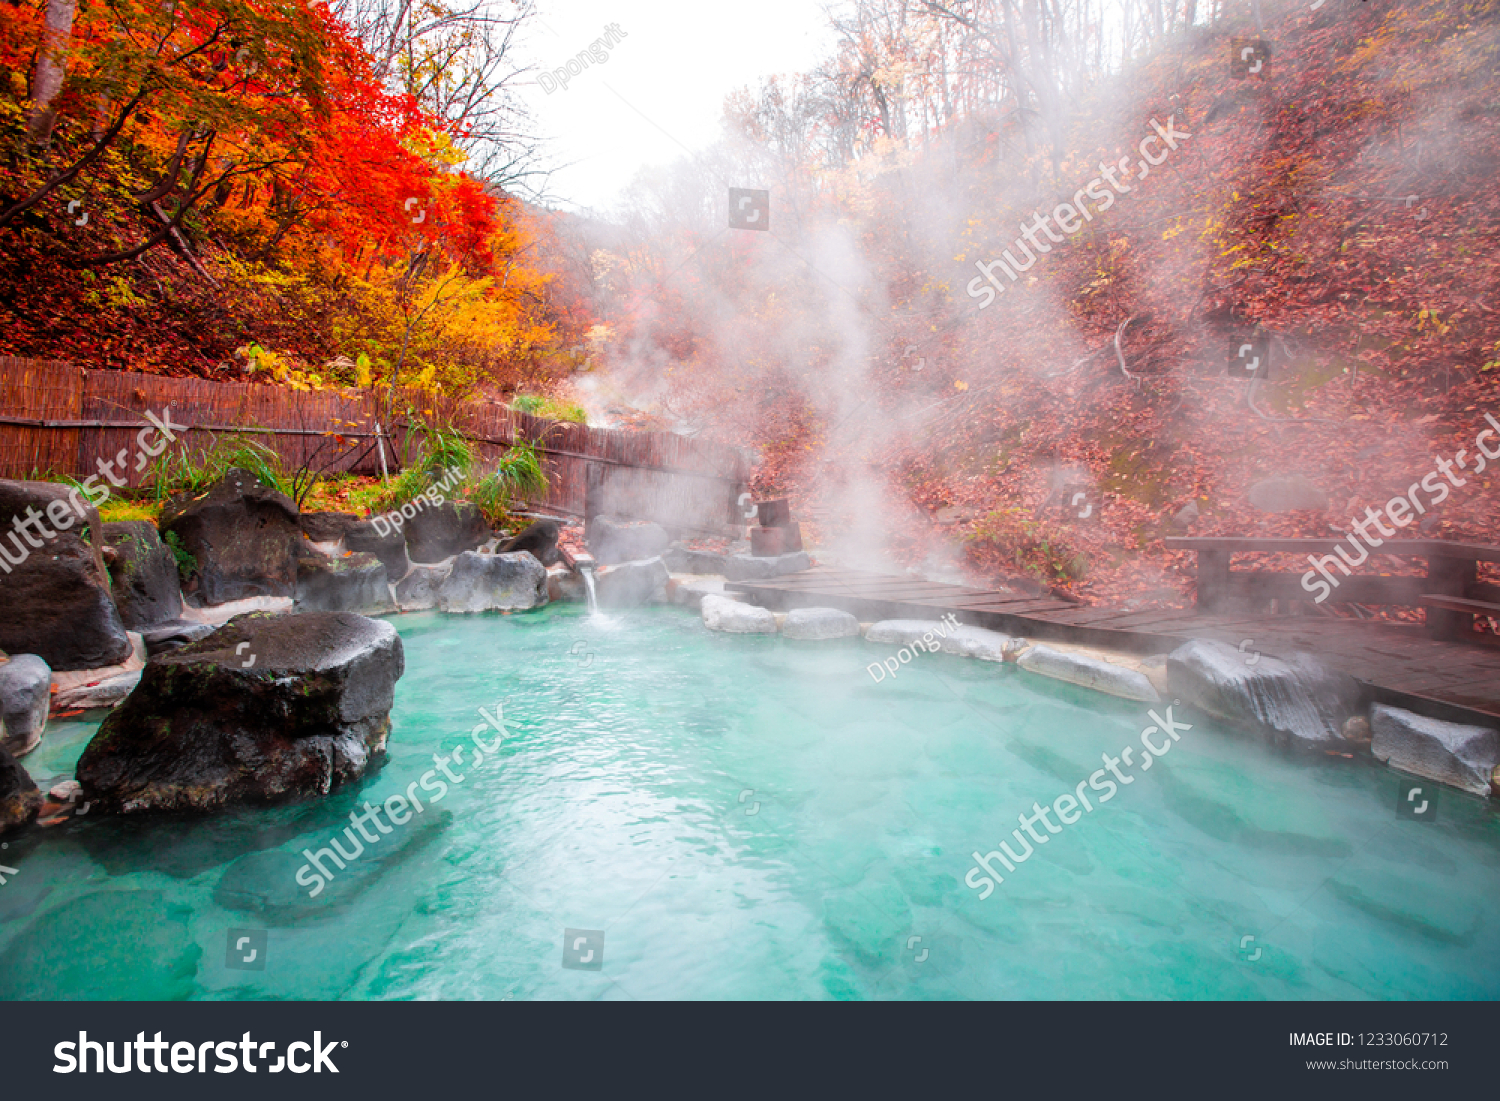 Japanese Hot Springs Onsen Natural Bath Surrounded by red-yellow leaves. In fall leaves fall in Yamagata. Japan. #1233060712